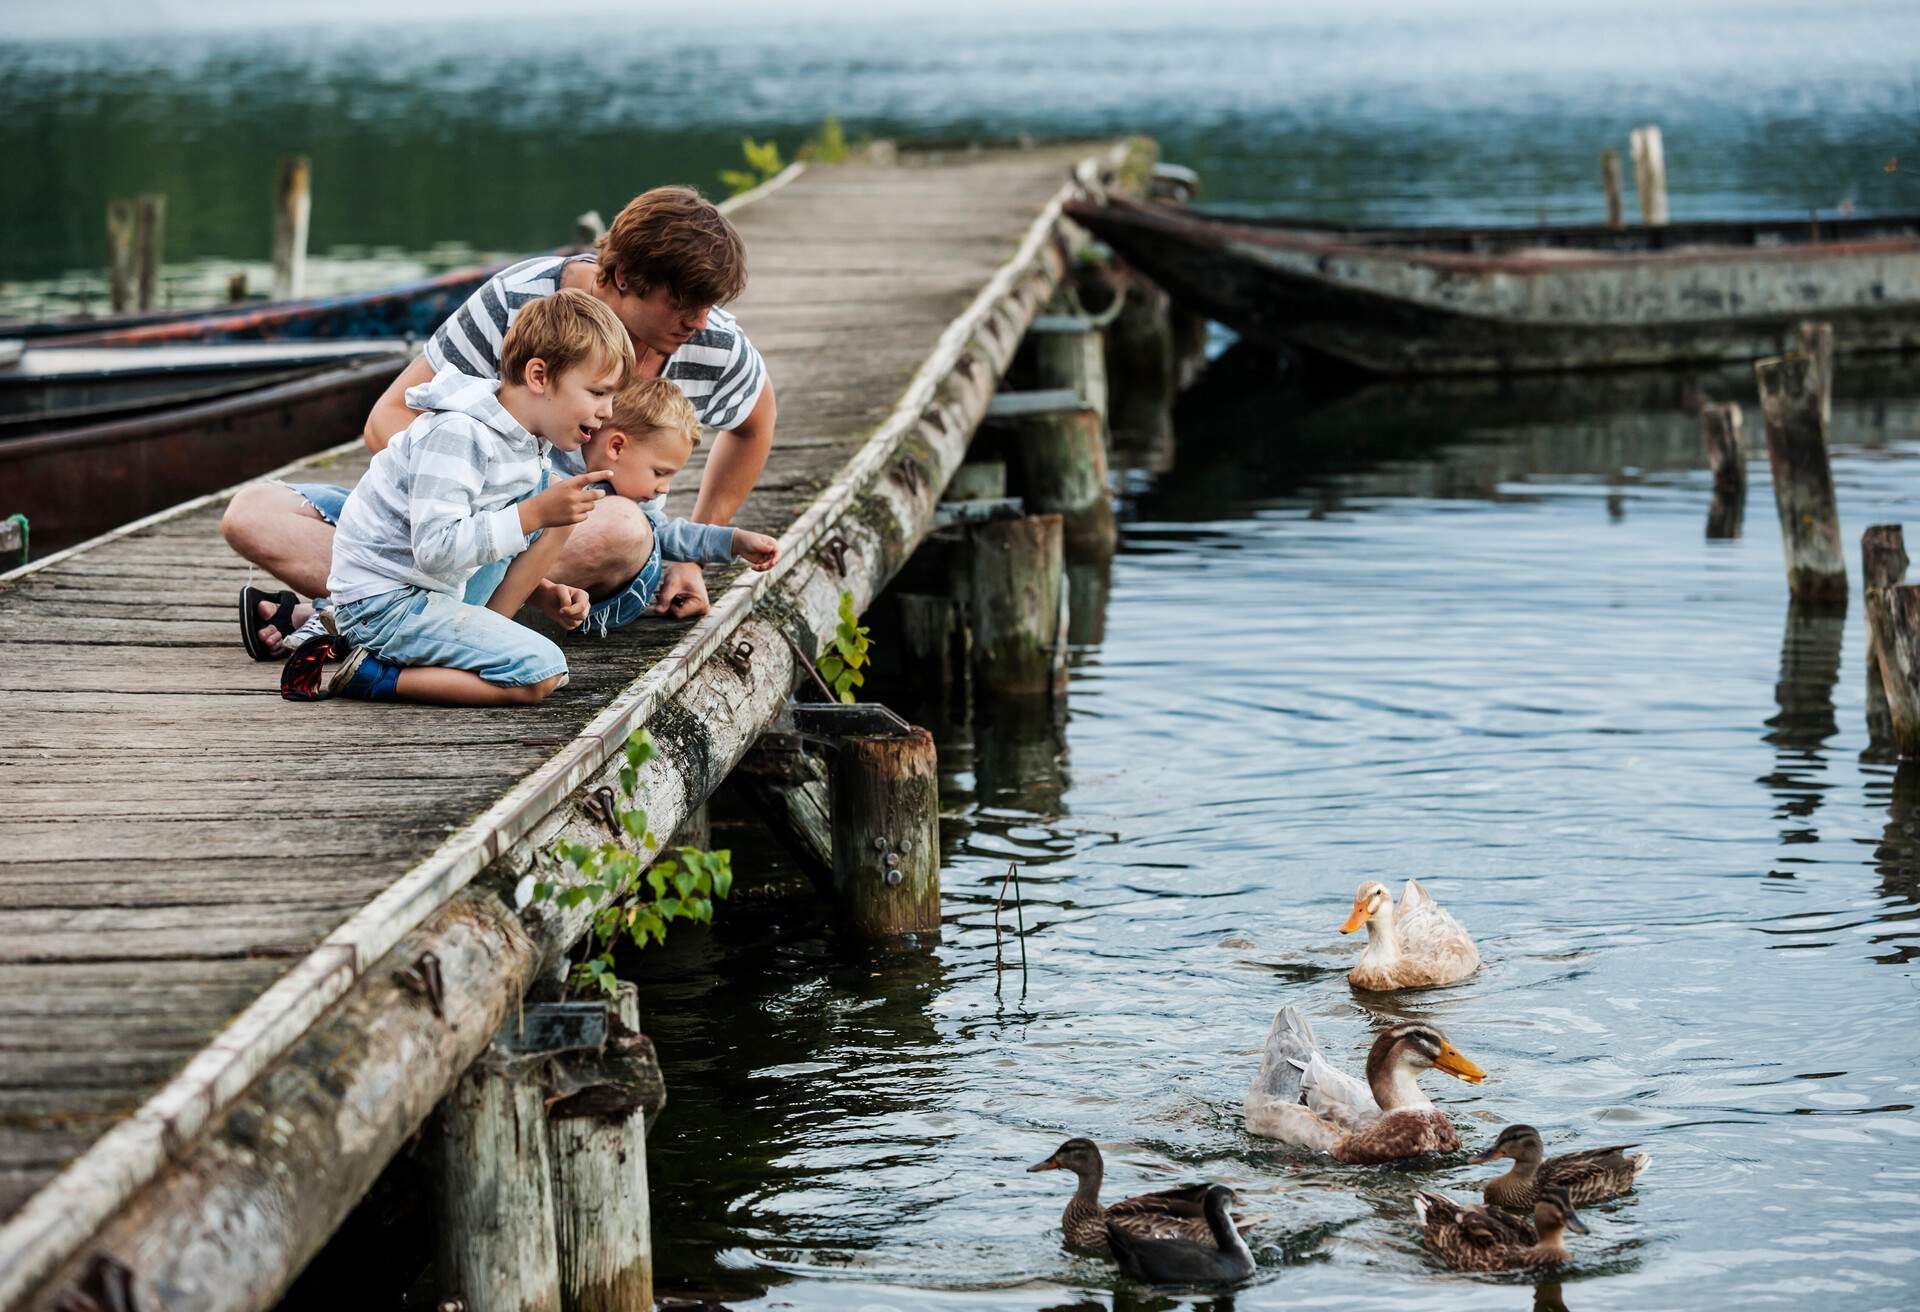 DEST_GERMANY_LAACHER-SEE_THEME_PEOPLE_CHILDREN_DUCKS_NATURE-GettyImages-530071933